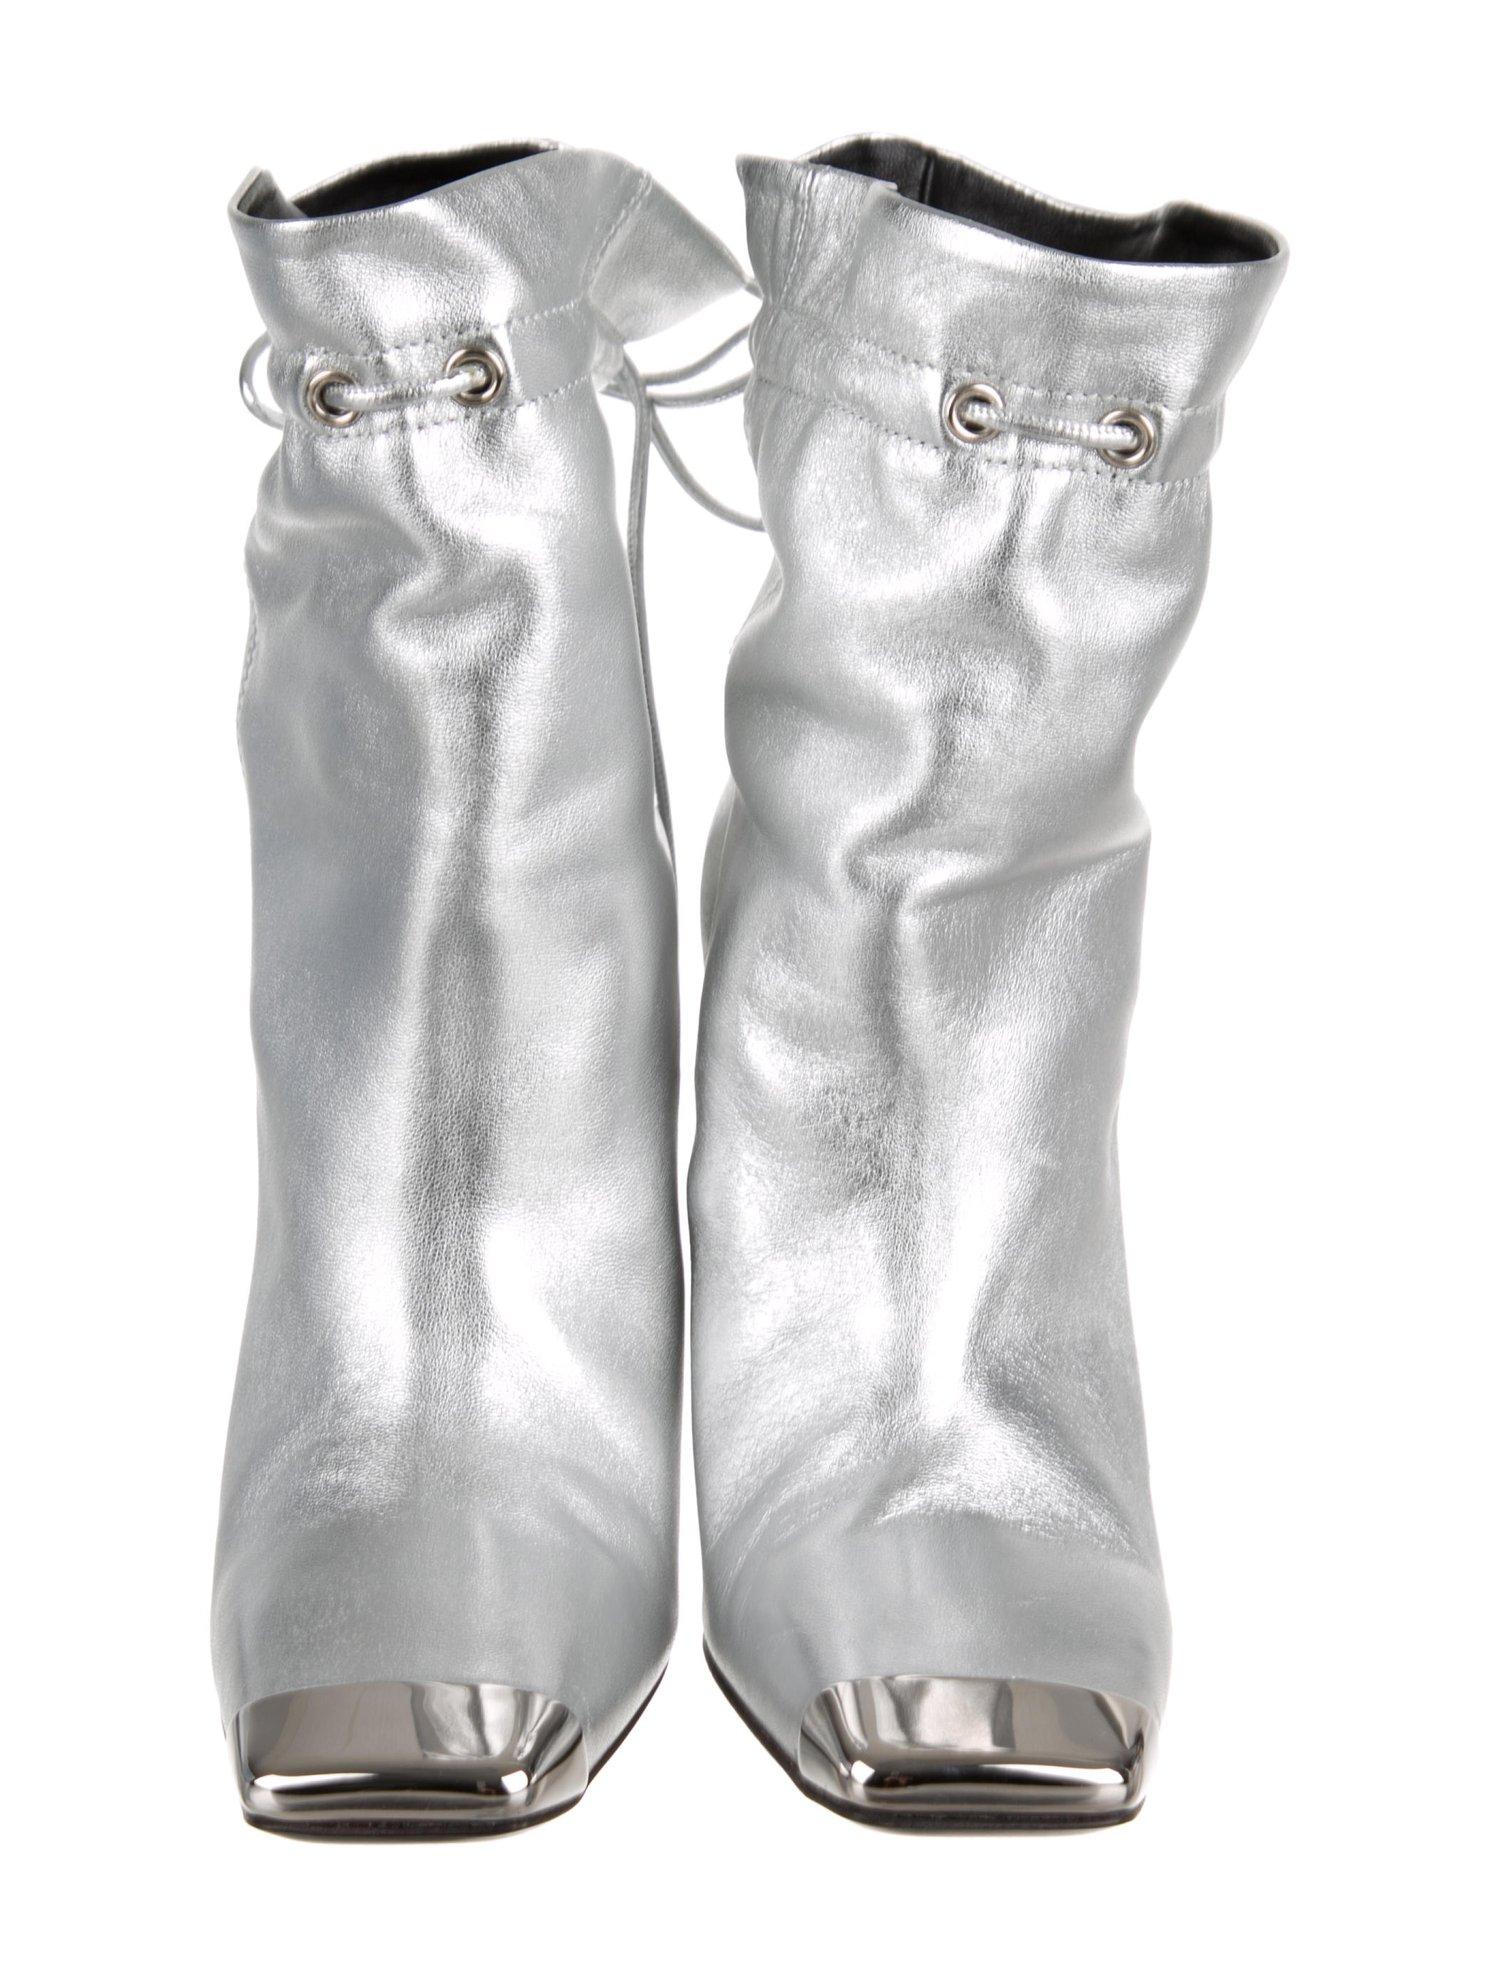 Tom Ford NEW Silver Leather Metal Toe Drawstring Evening Ankle Boots Booties 

Size IT 36.5
Leather
Metal
Made inItaly
Heel height 4